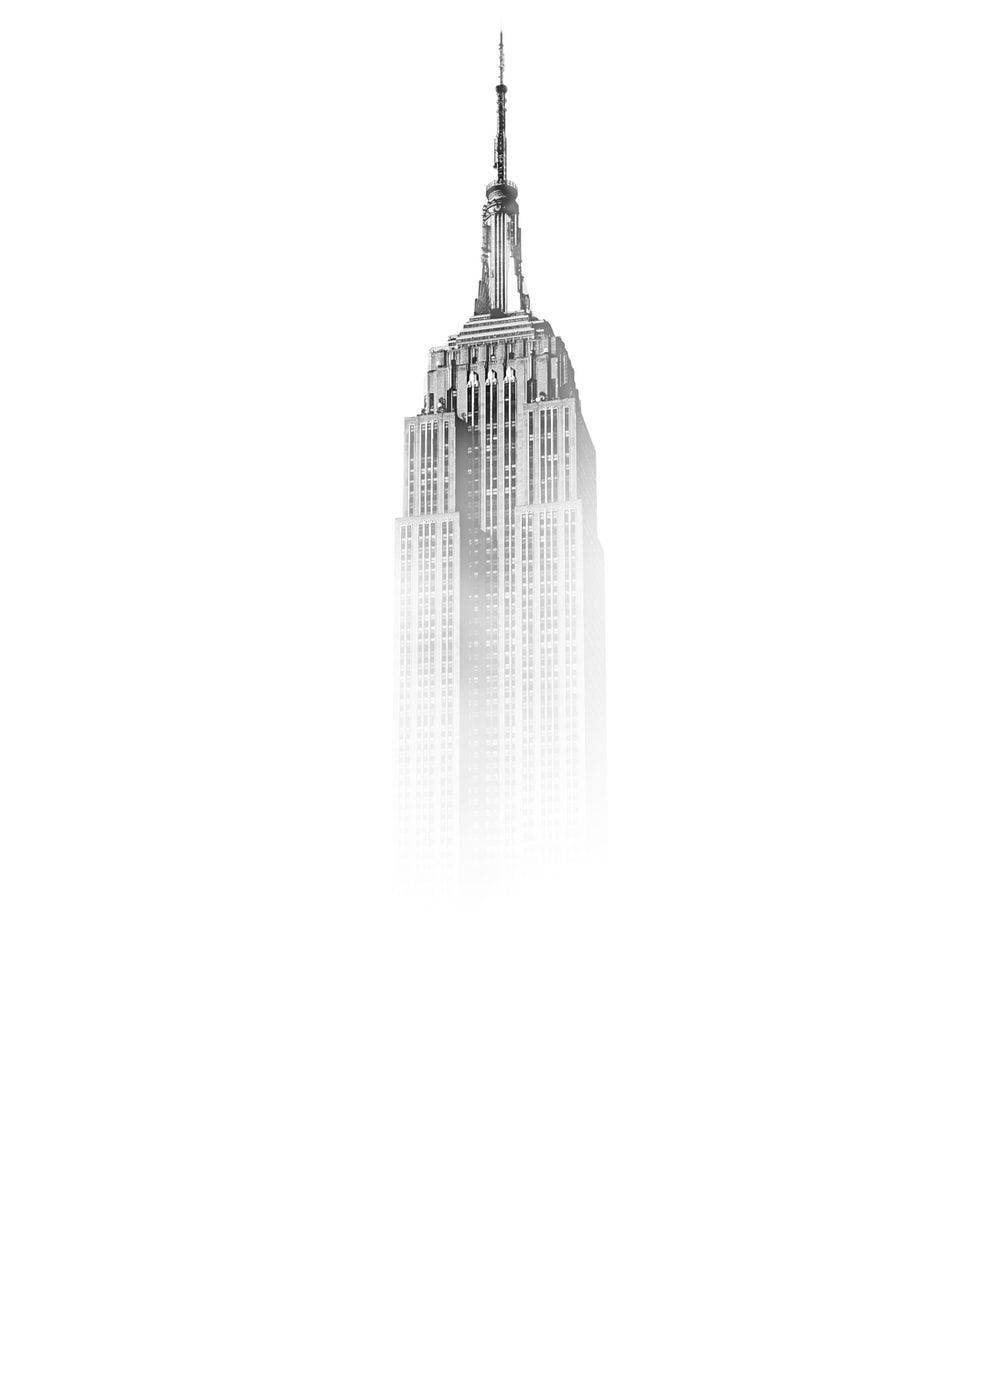 Blank White Empire State Building Faded Wallpaper